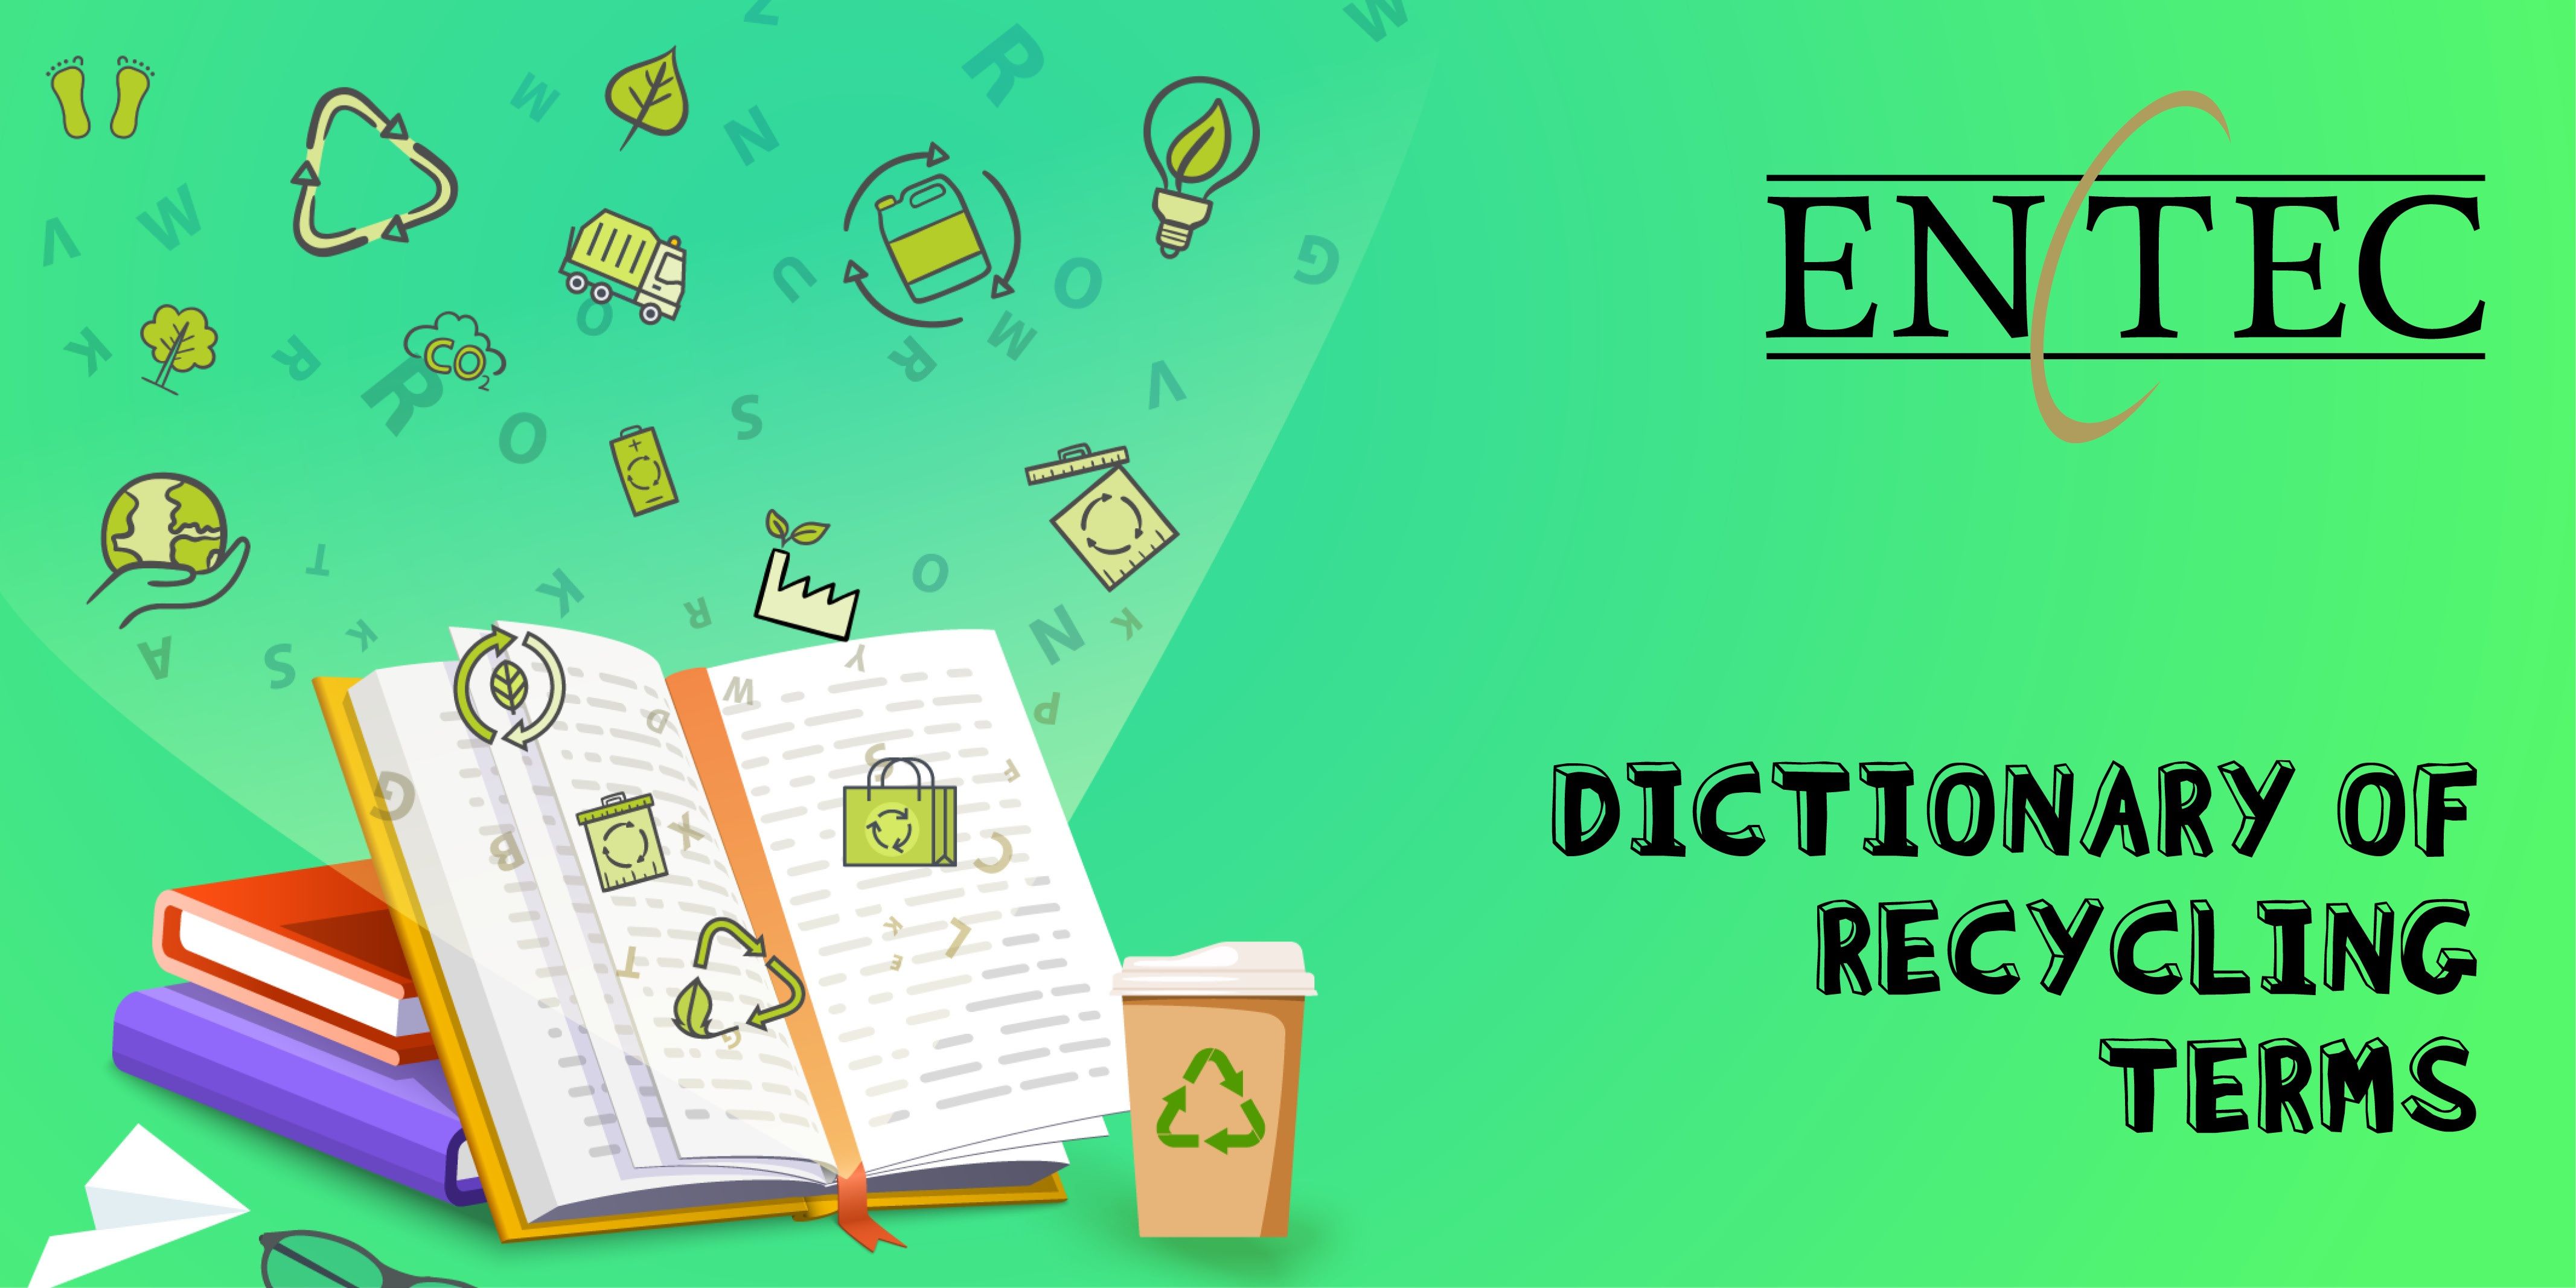 Dictionary of Recycling Terms Social Media Post